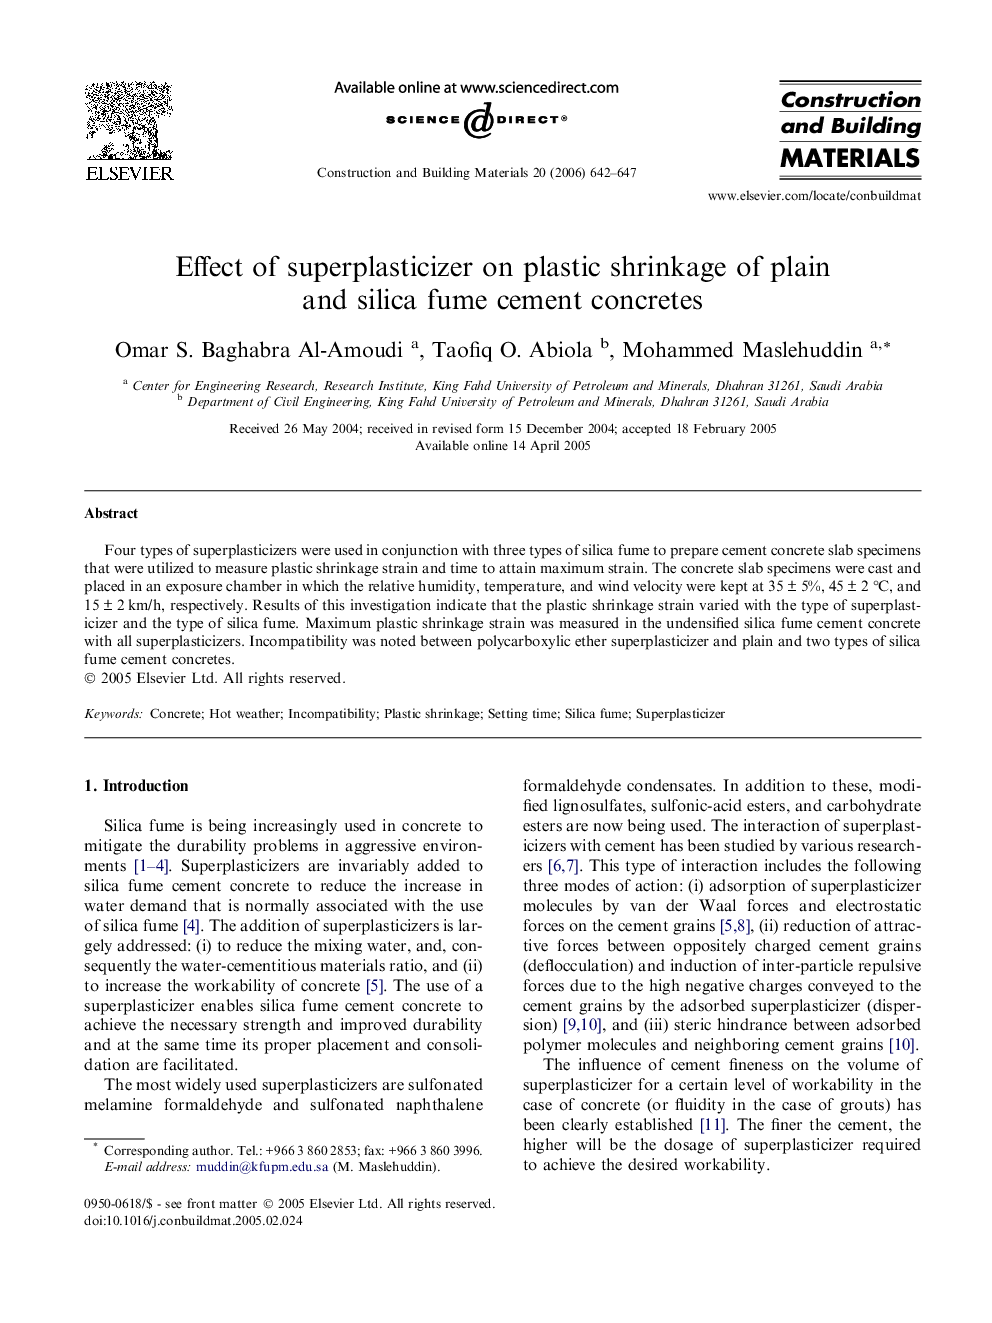 Effect of superplasticizer on plastic shrinkage of plain and silica fume cement concretes